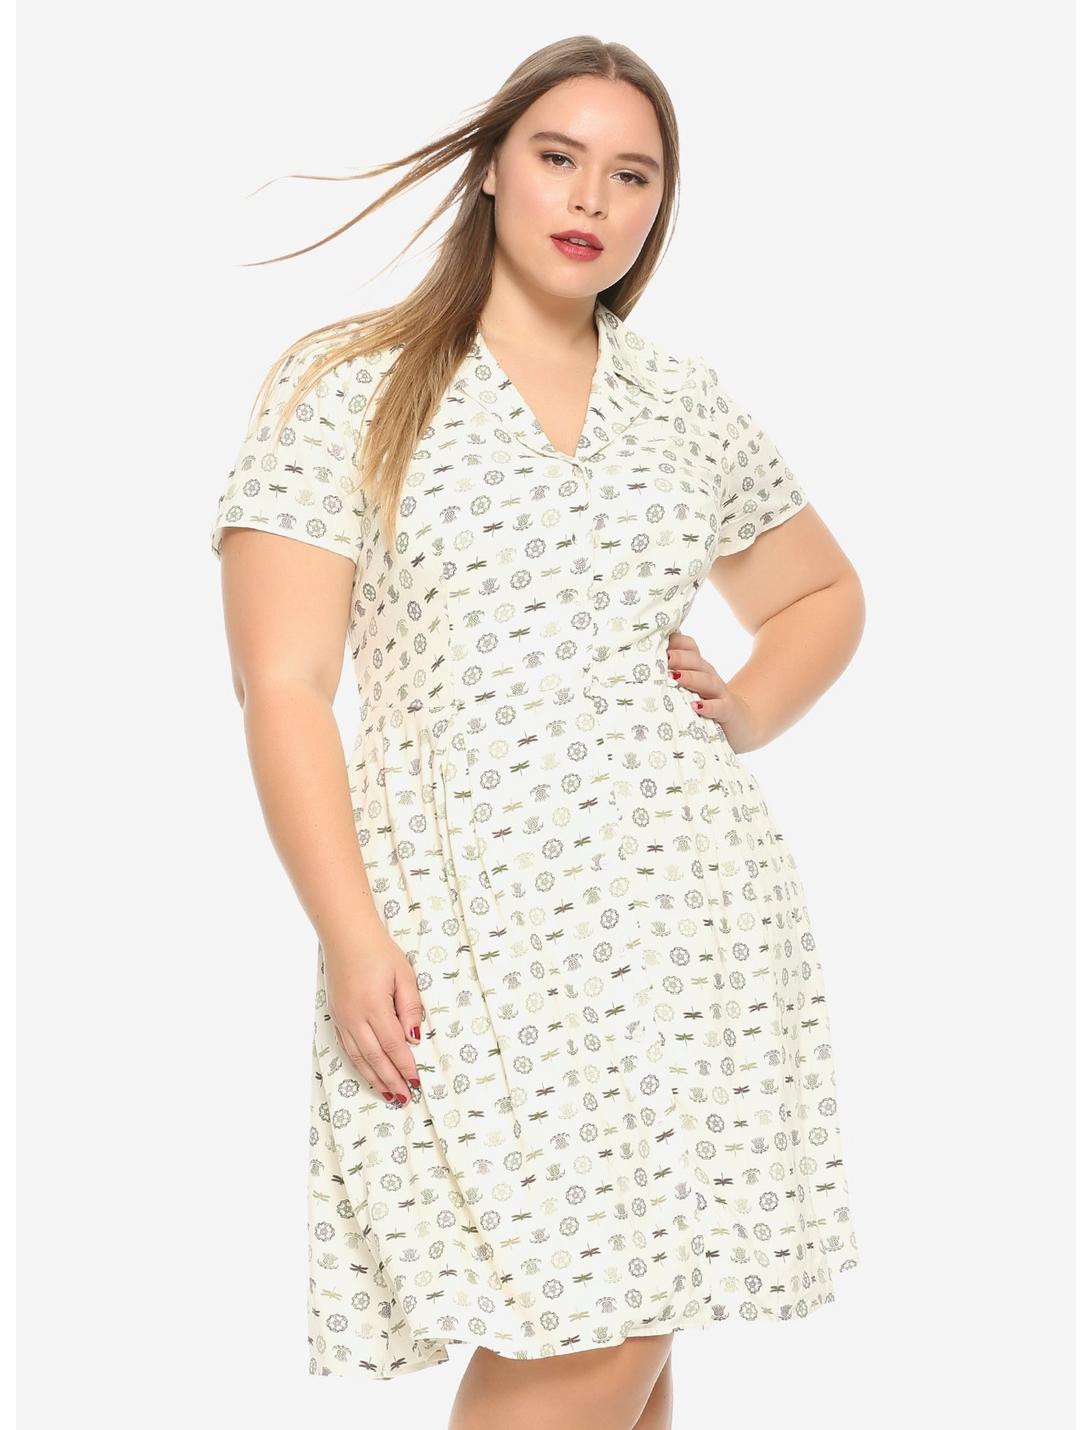 Outlander 1940s Shirt Dress Plus Size Hot Topic Exclusive, IVORY, hi-res